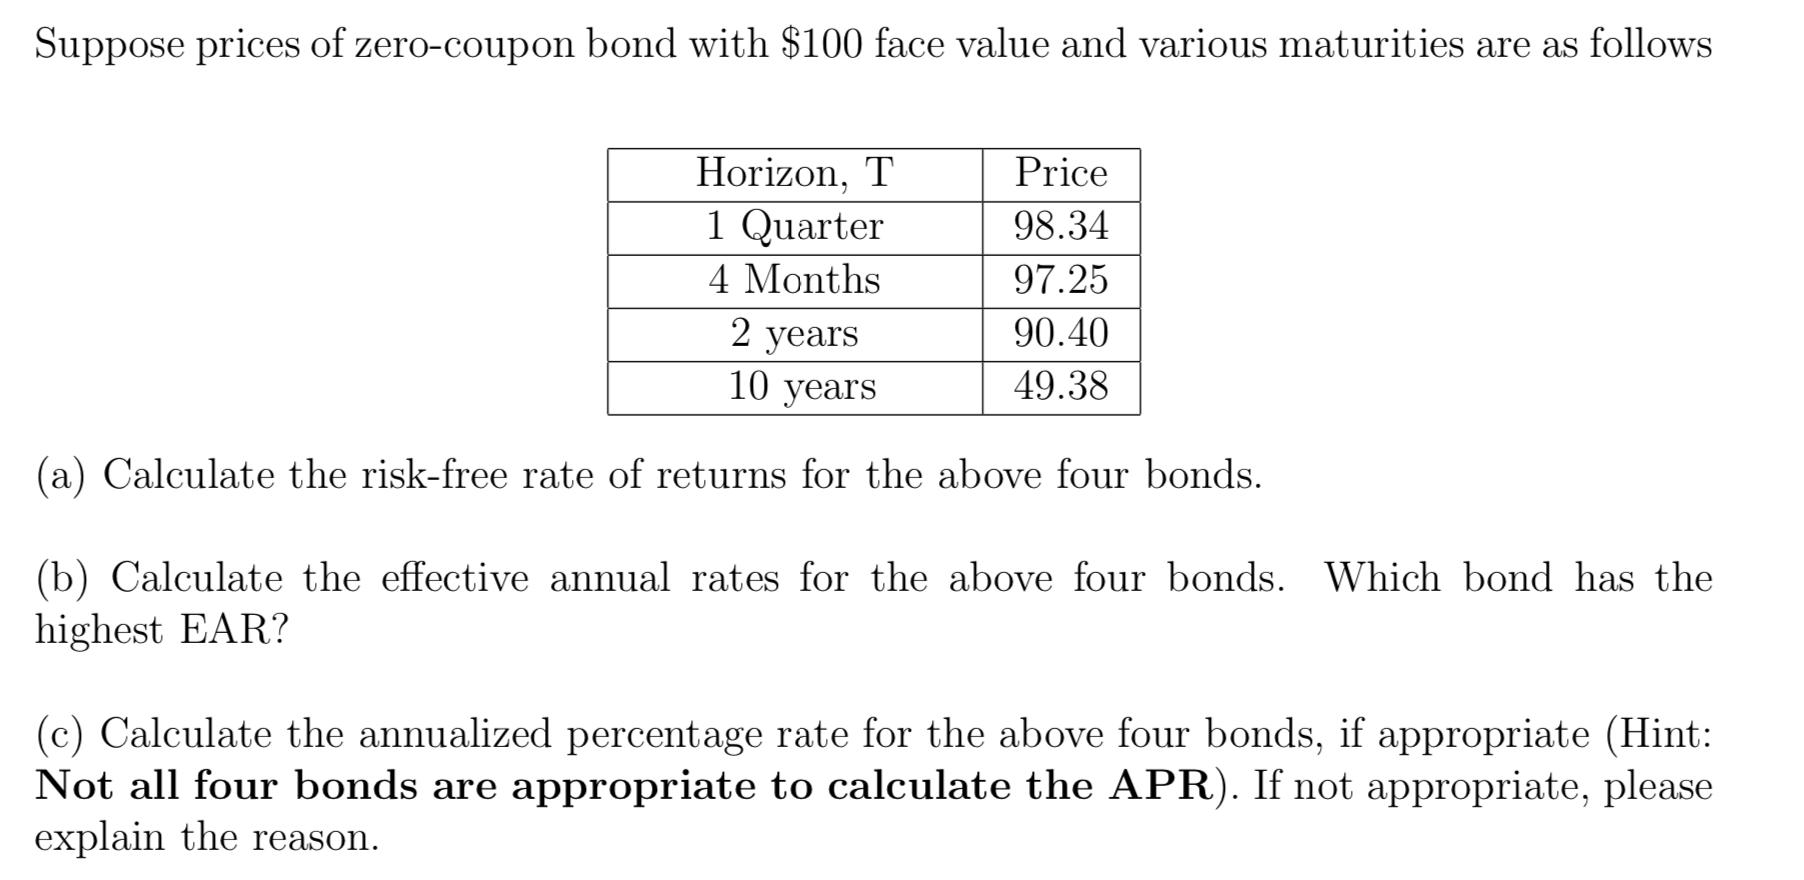 Suppose prices of zero-coupon bond with $100 face value and various maturities are as followsHorizon, T.1 Quarter4 Months